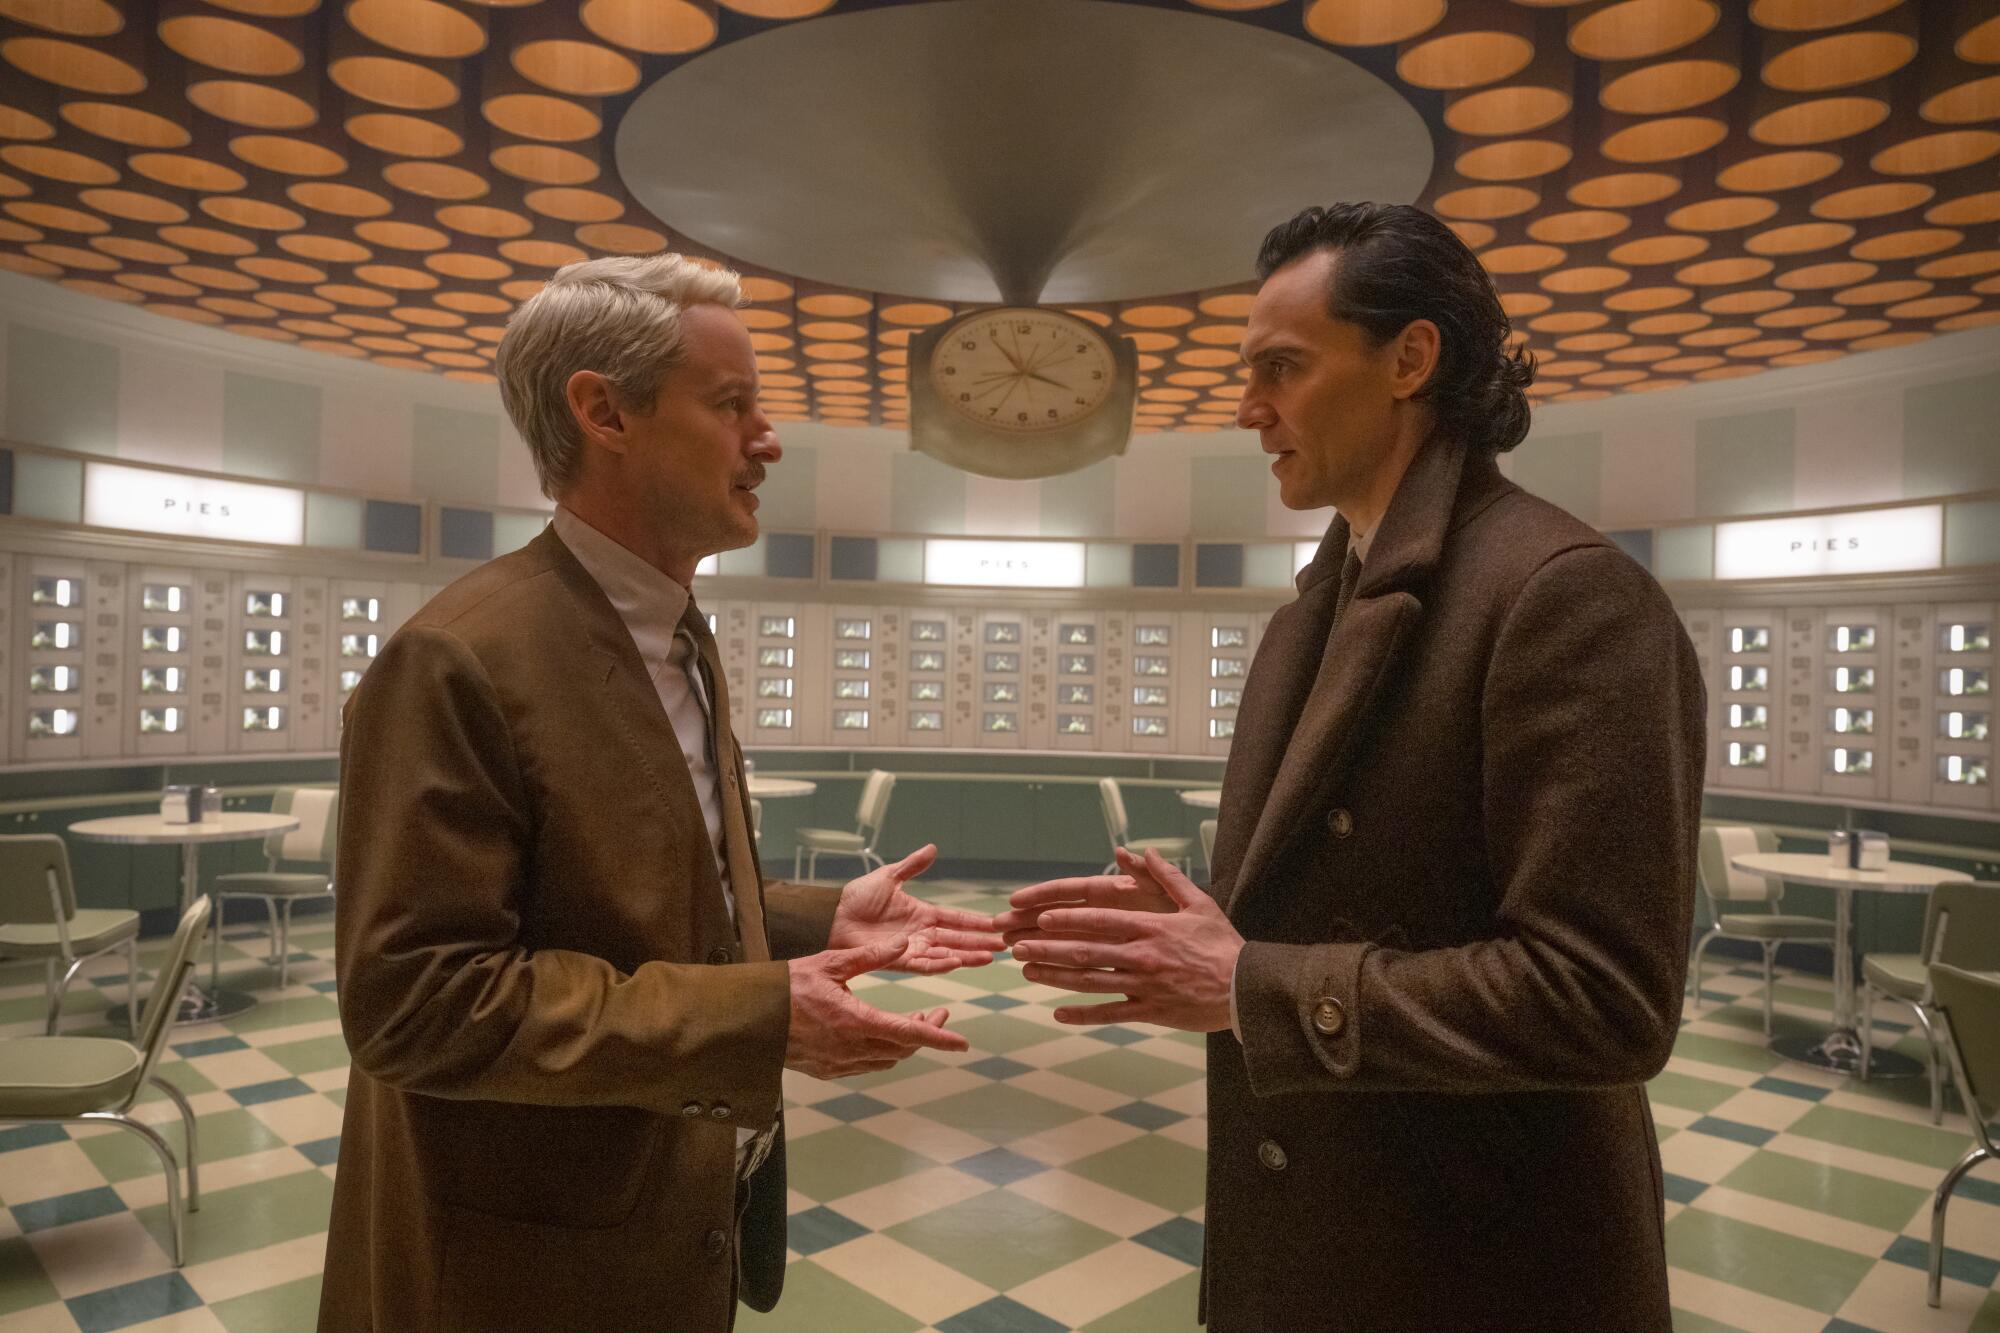 A gray-haired man in a brown suit speaks to Loki in an empty green and white diner.